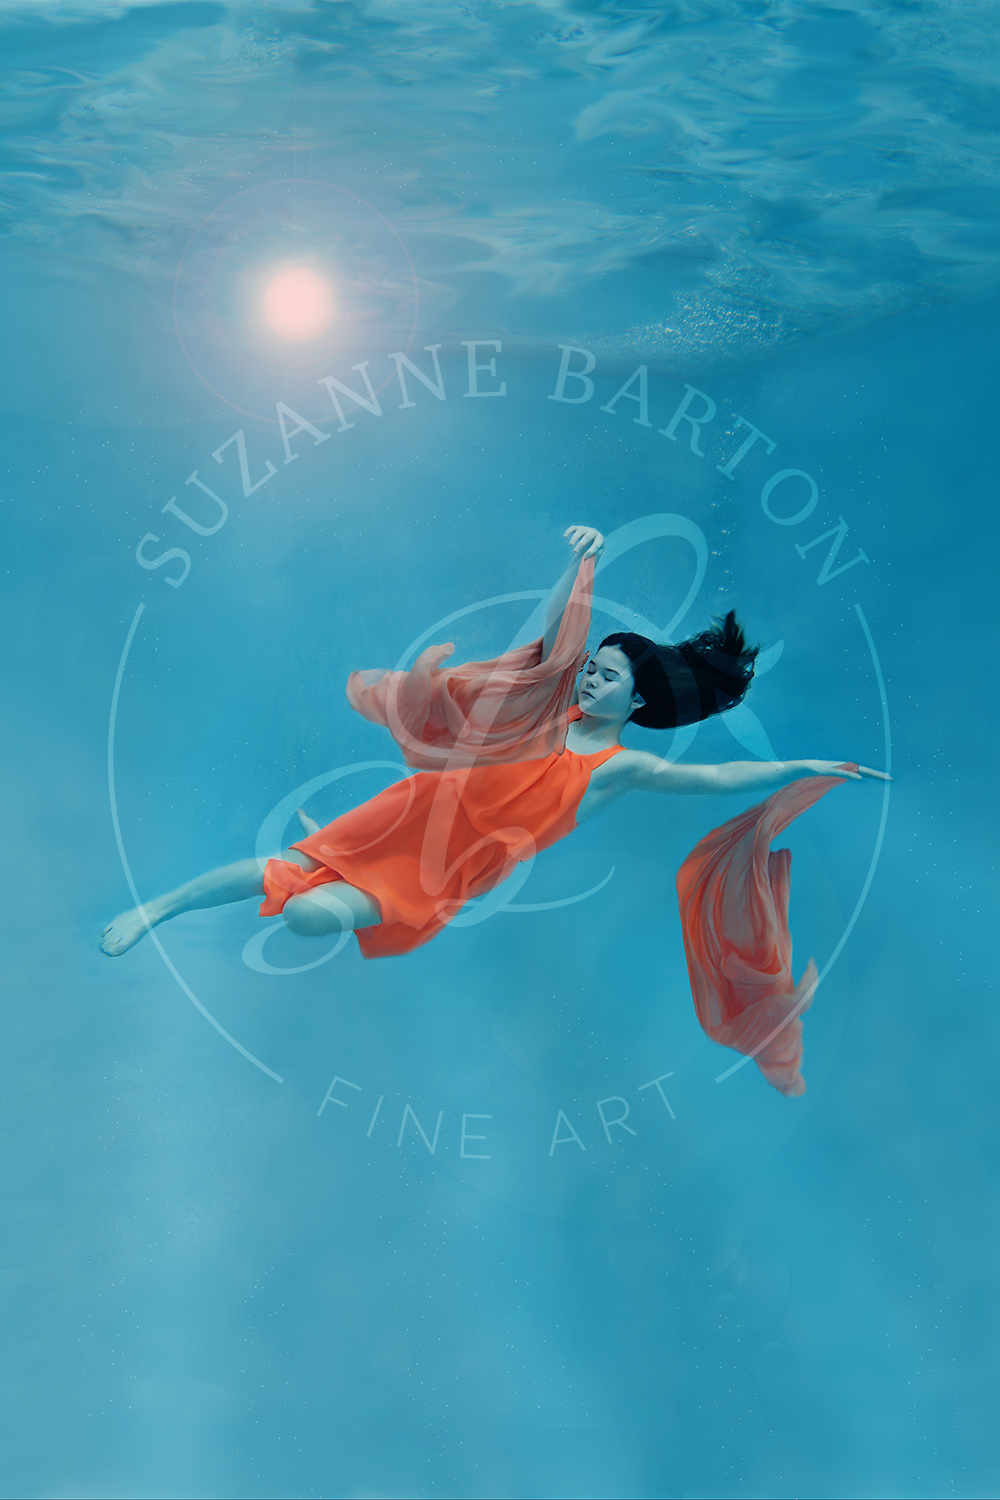 Sunset Dreaming - Suzanne Barton - Limited Edition